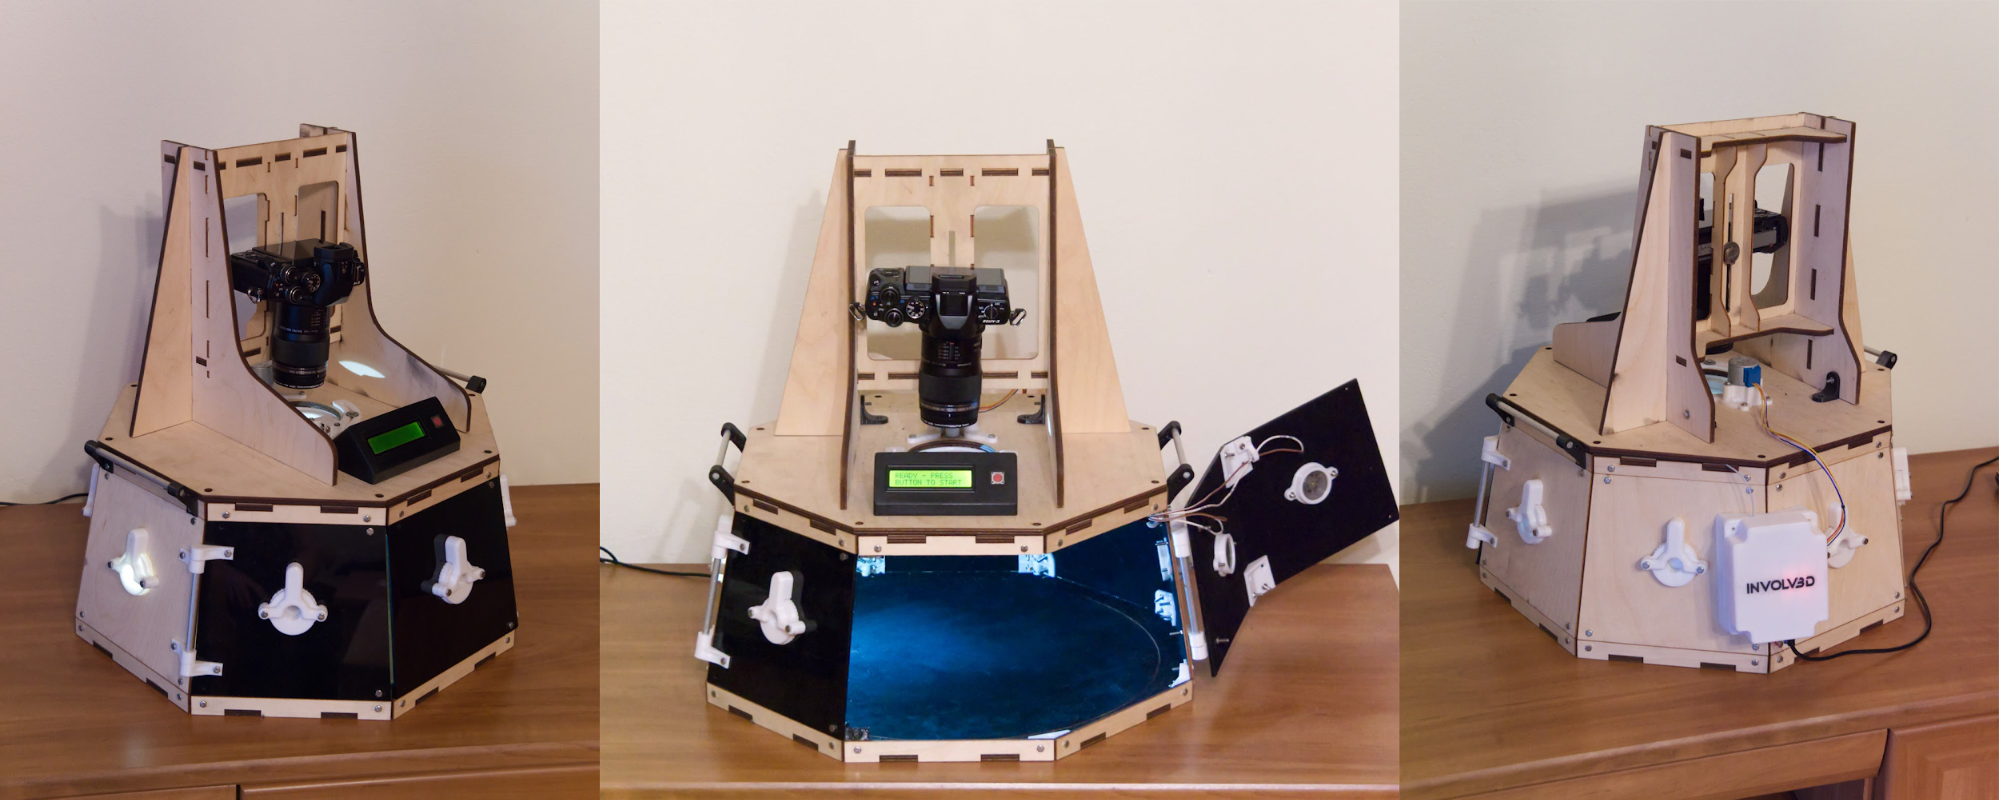 prototype rig using laser-cut plywood and 3D-printed elements